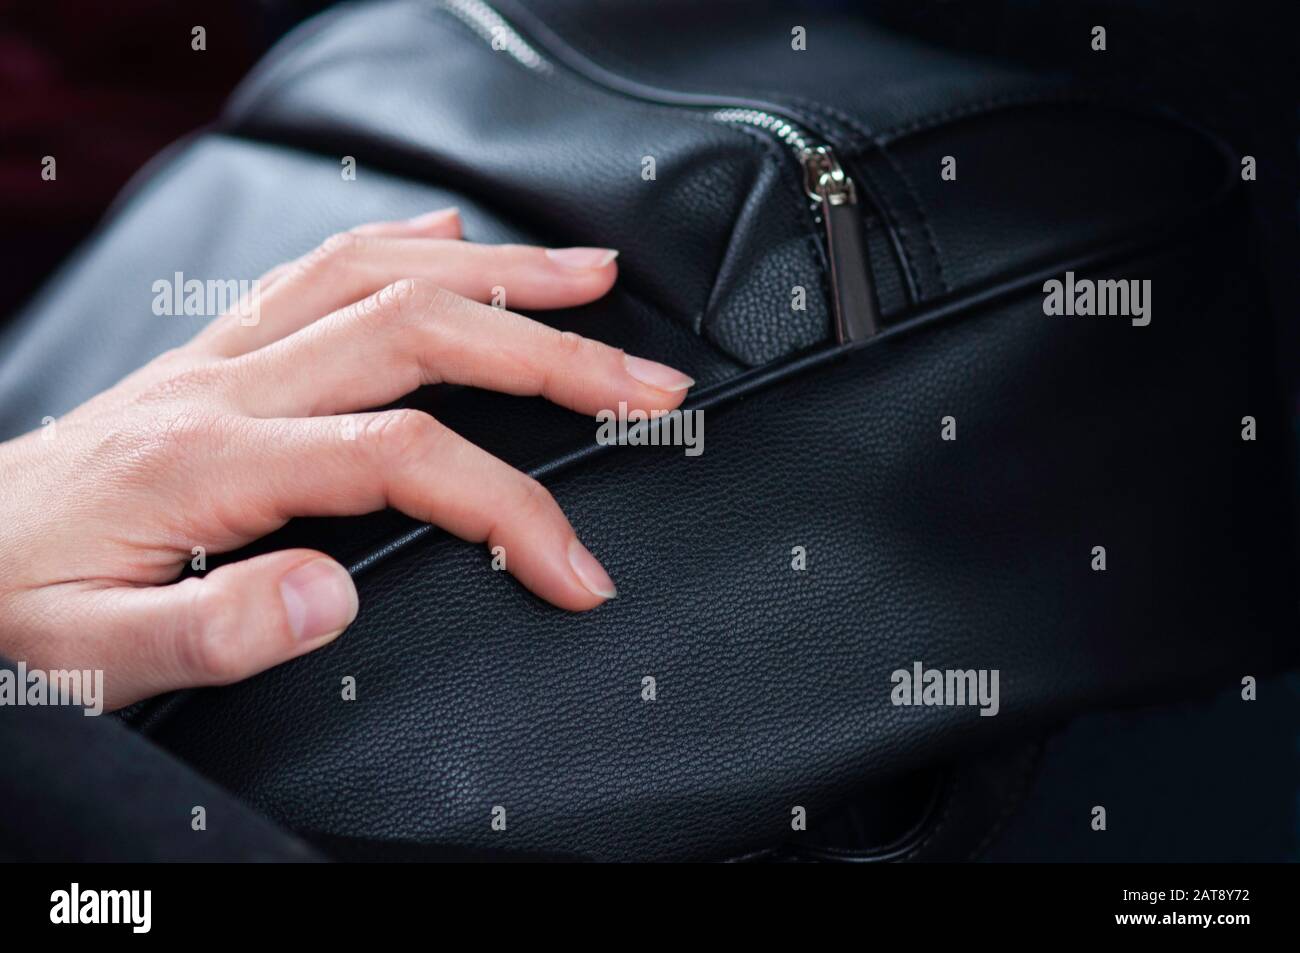 woman hand resting on a black purse Stock Photo